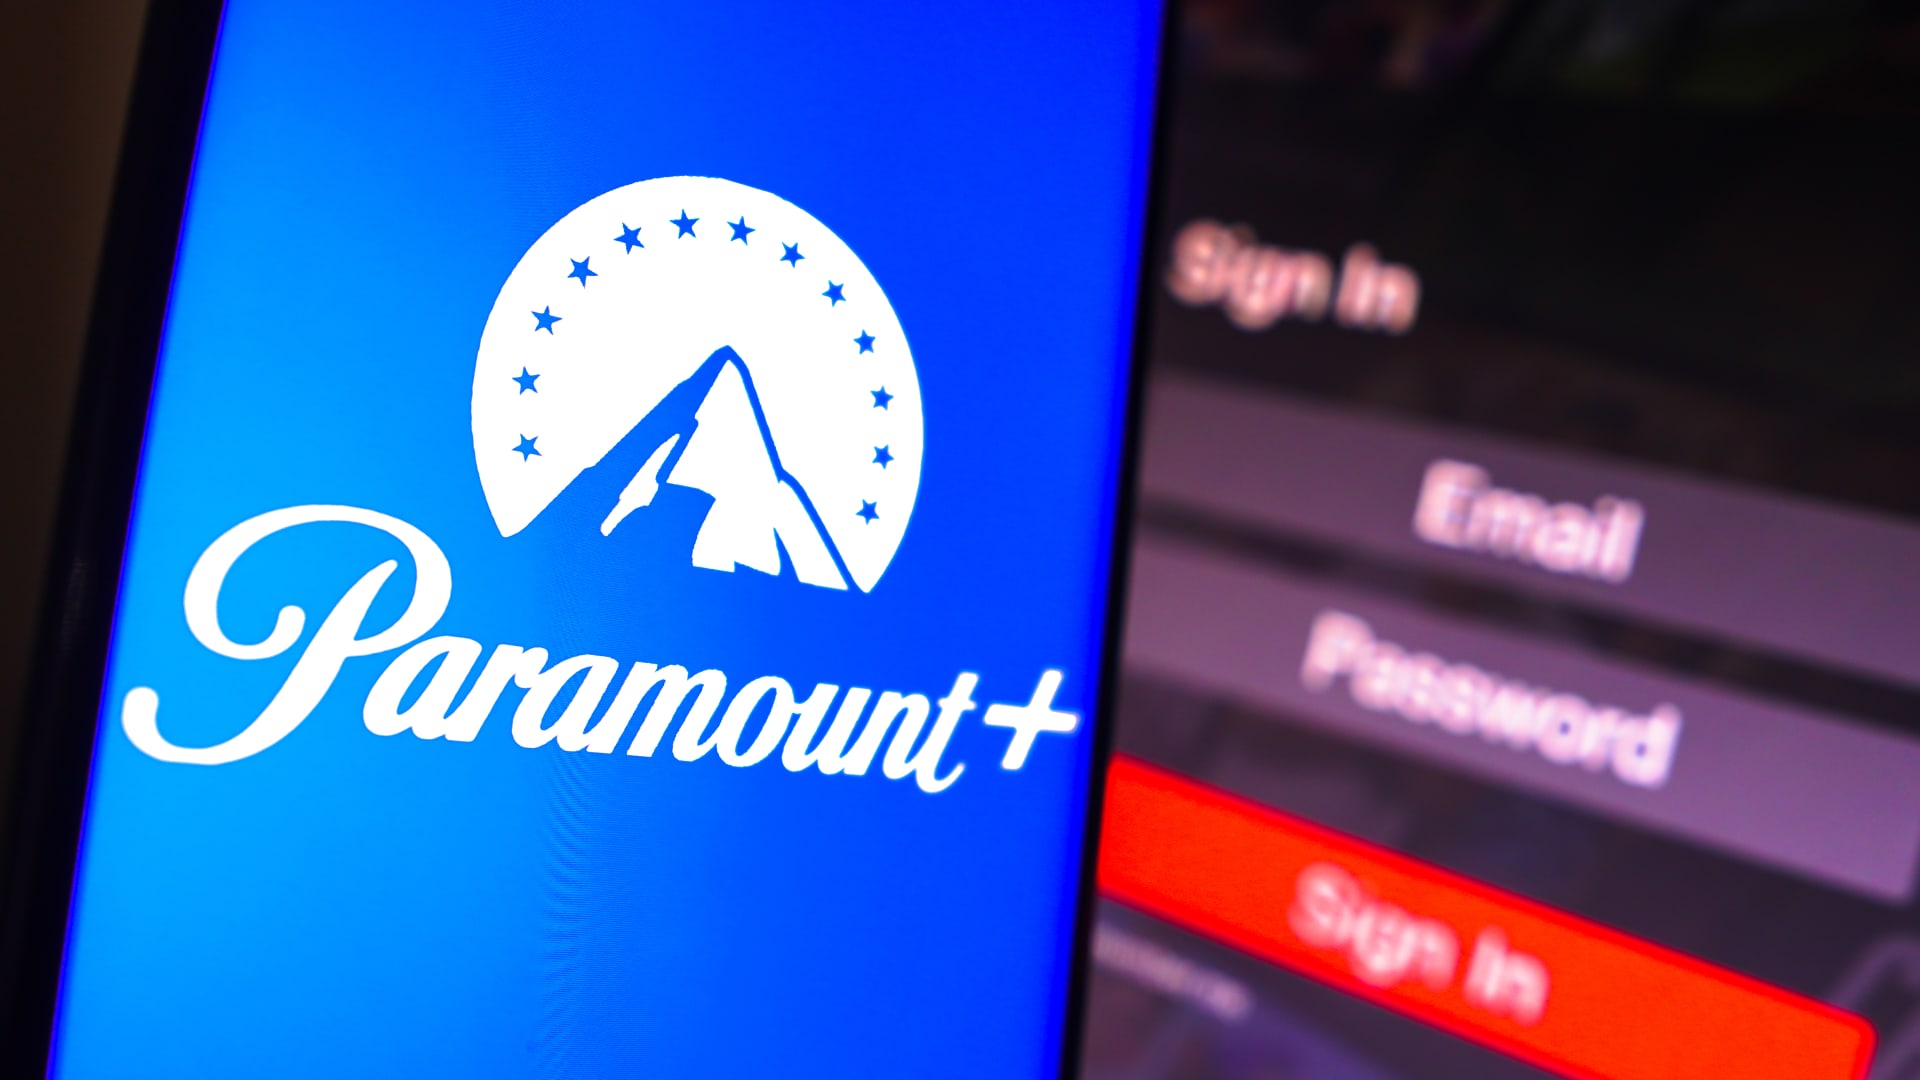 Paramount, even with a takeover offer, may still prove a rare losing bet for Berkshire Hathaway